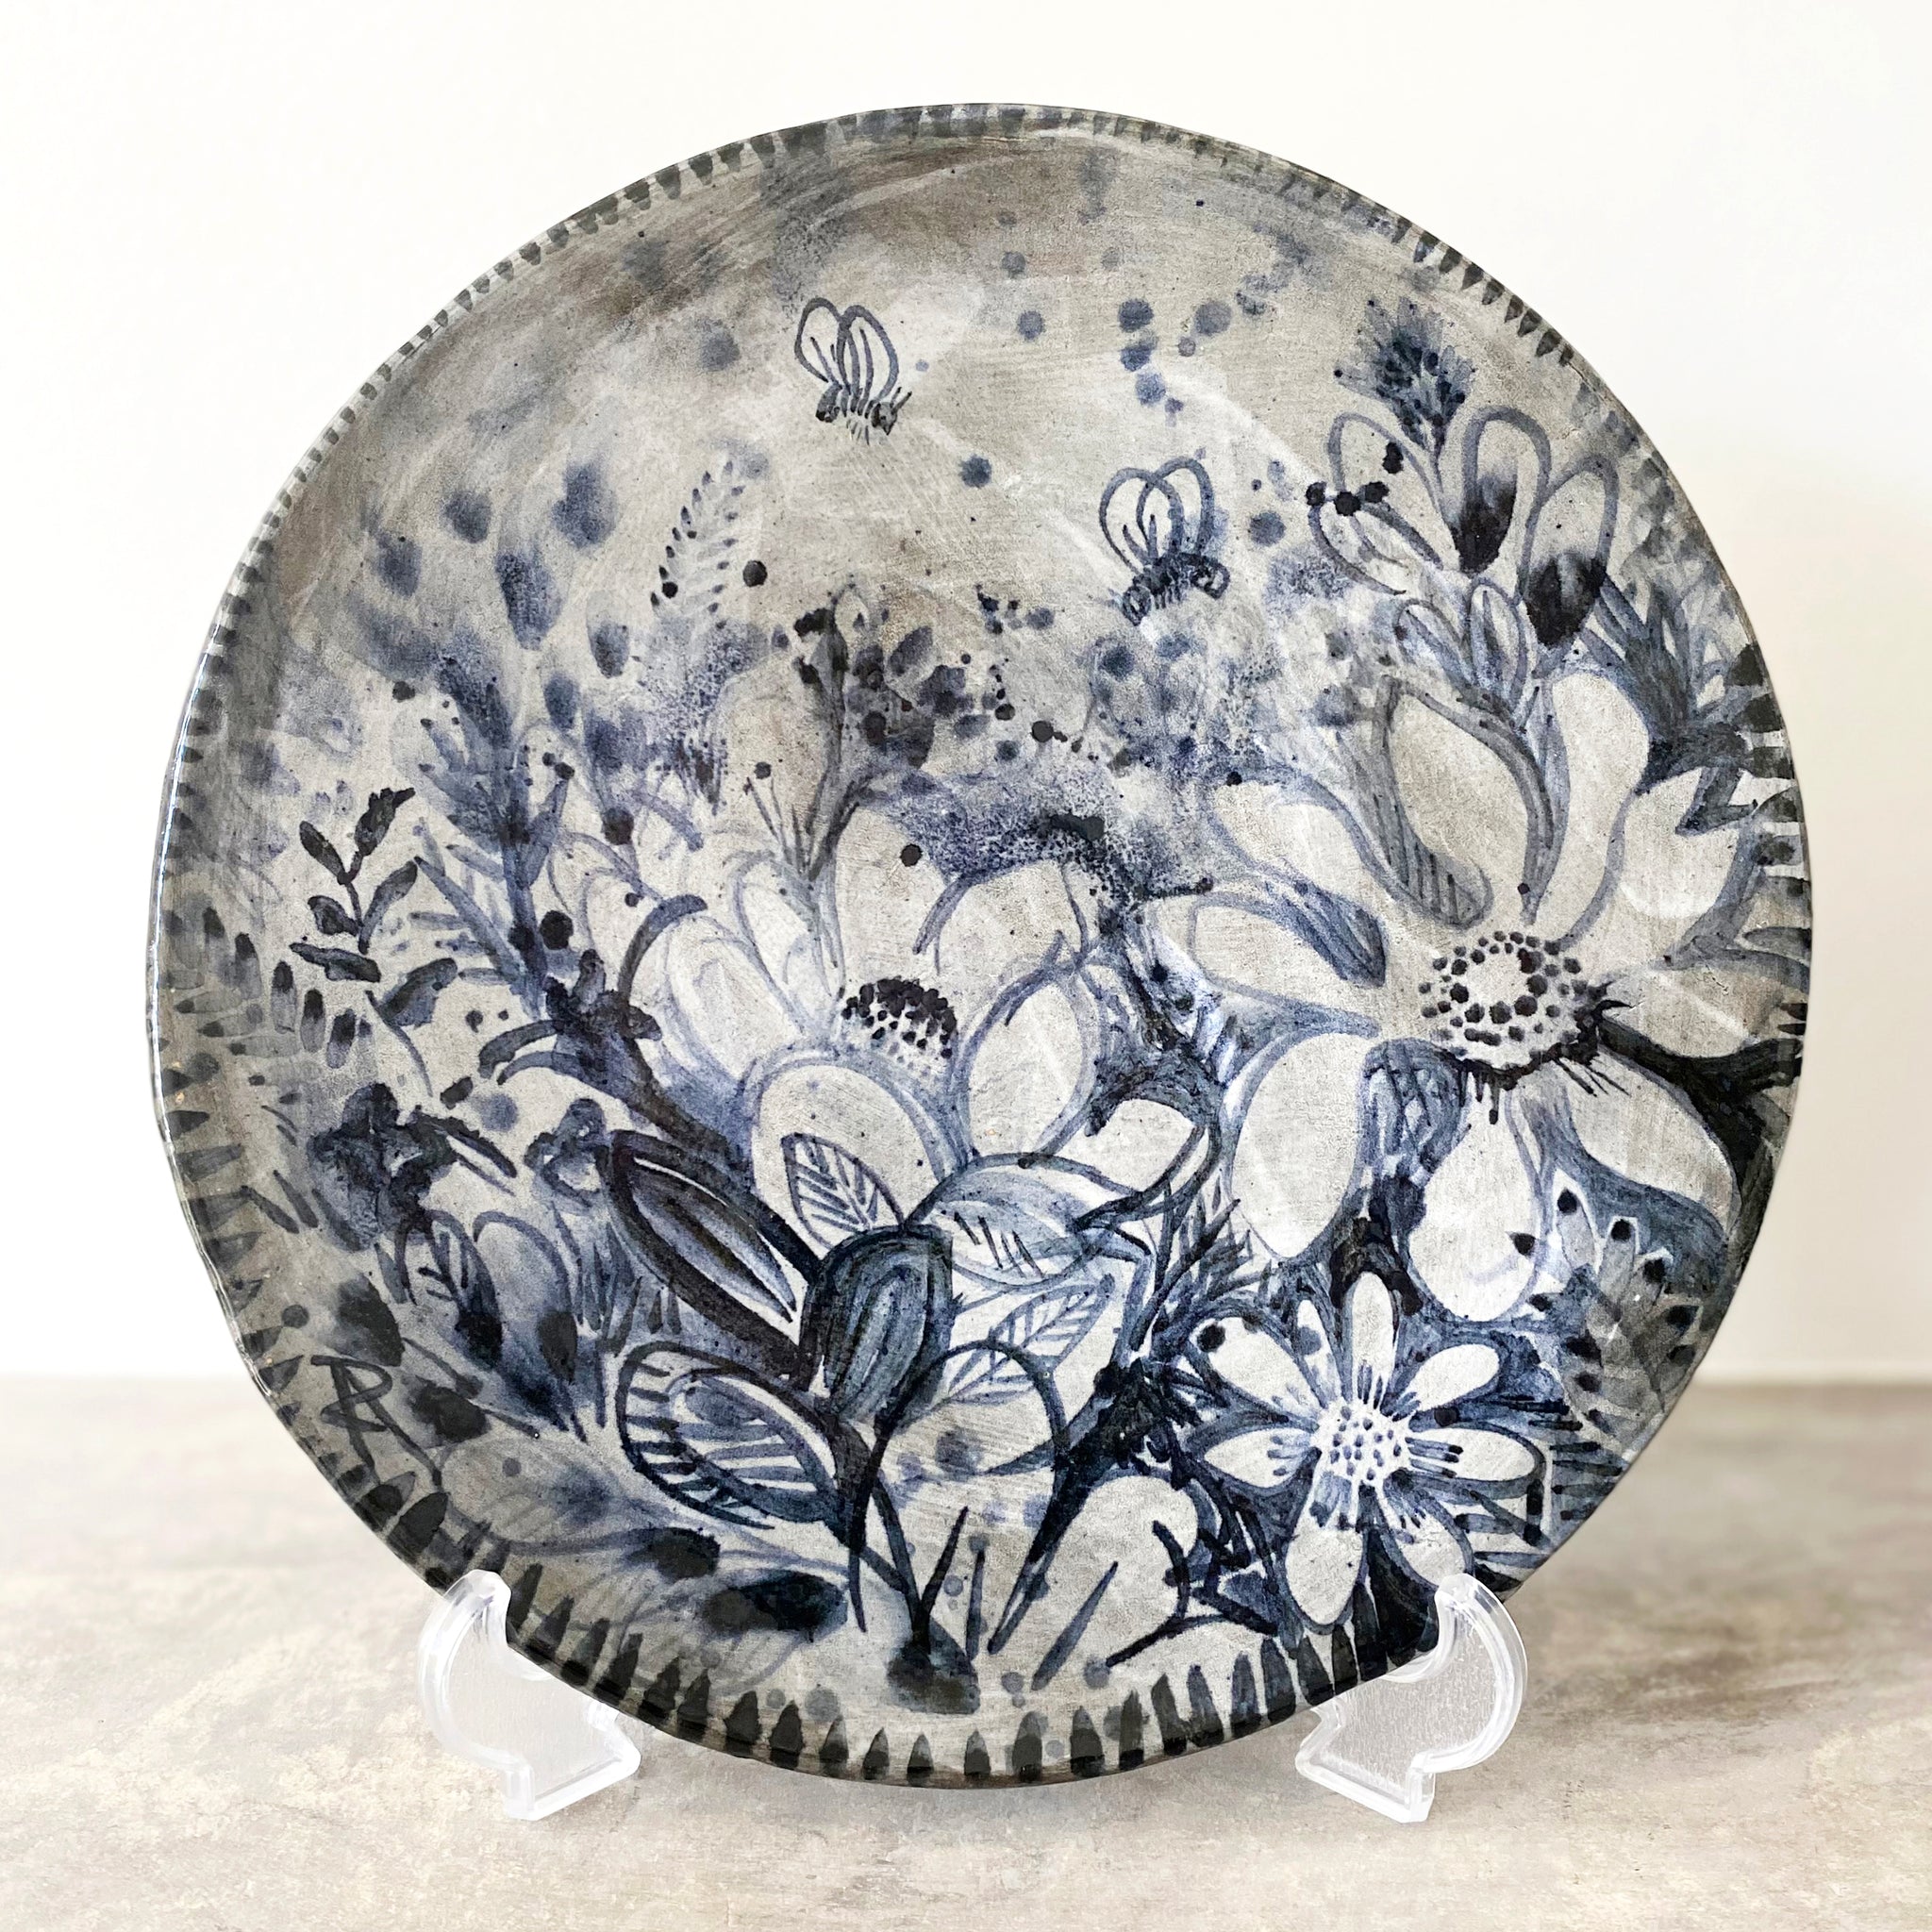 Hand-painted Floral Decorative Plate